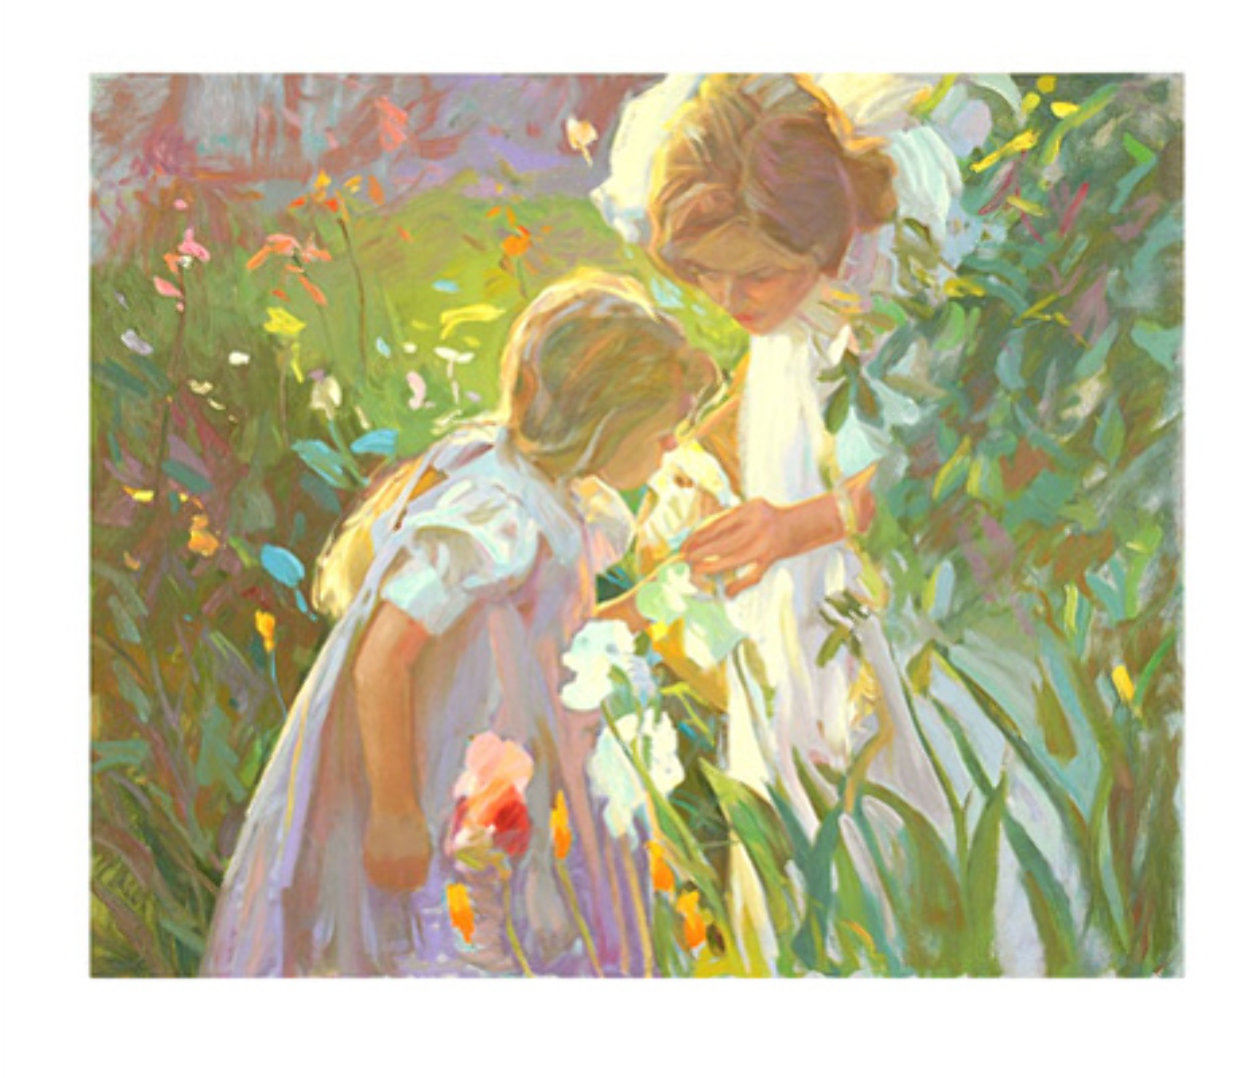 Sweet Scents AP 1993 Limited Edition Print by Don Hatfield